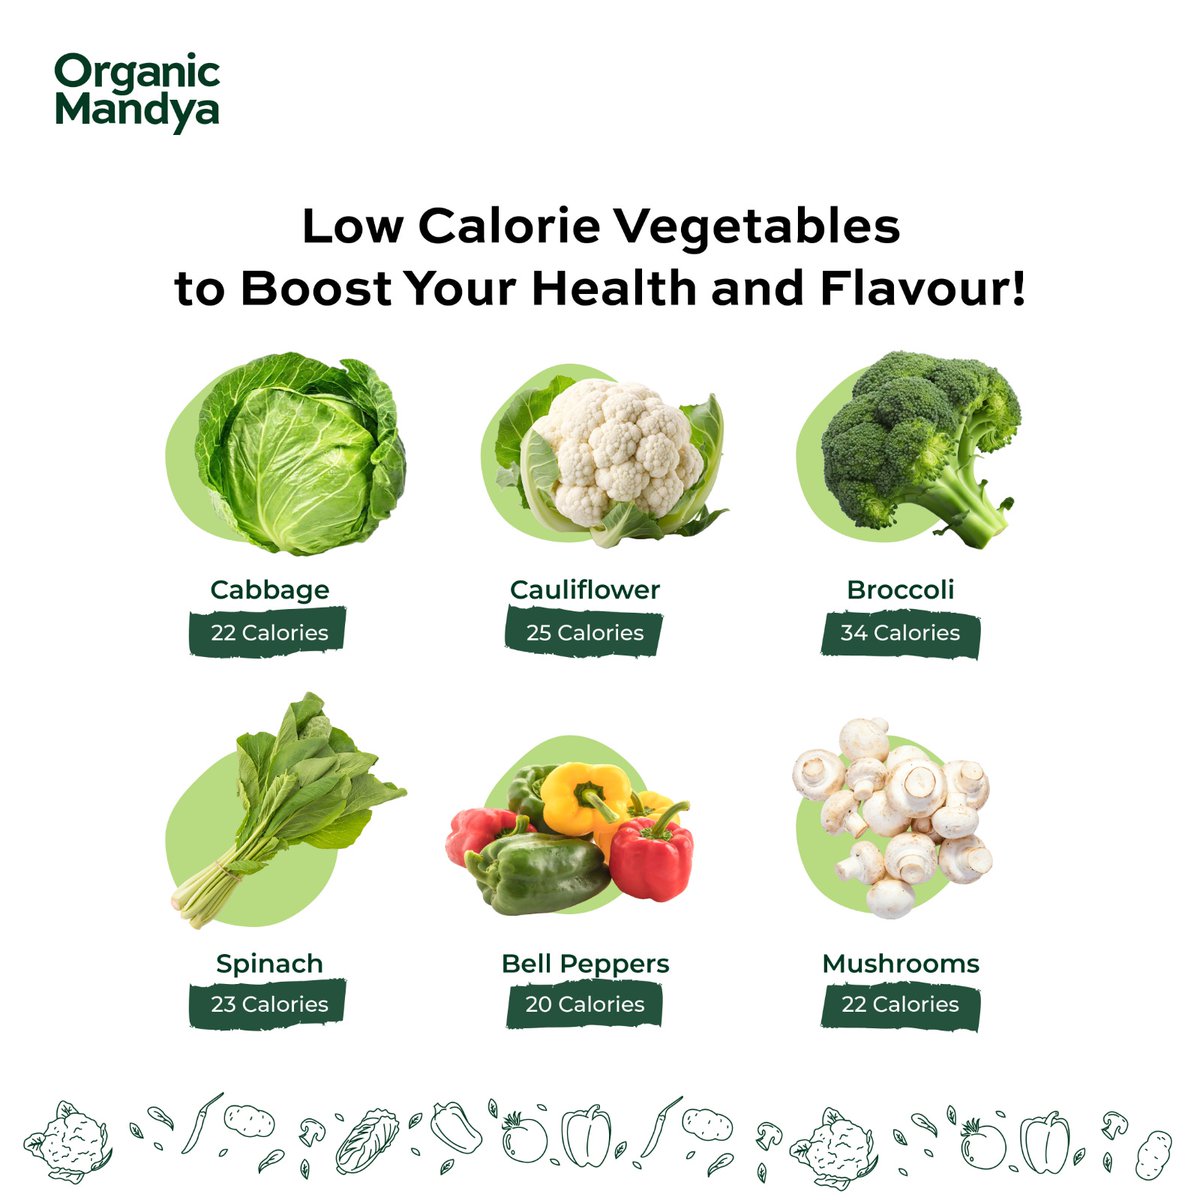 Watching Your Calorie Count? These Veggies Have Your Back! Incorporate These Low-Calorie Powerhouses into your daily meals for a 𝐡𝐞𝐚𝐥𝐭𝐡𝐲 𝐛𝐨𝐨𝐬𝐭! #Organic #Organiclife #Organicliving #Organicfood #OrganicMandya #Healthyliving #Healthychoices #Healthypicks #Fresh